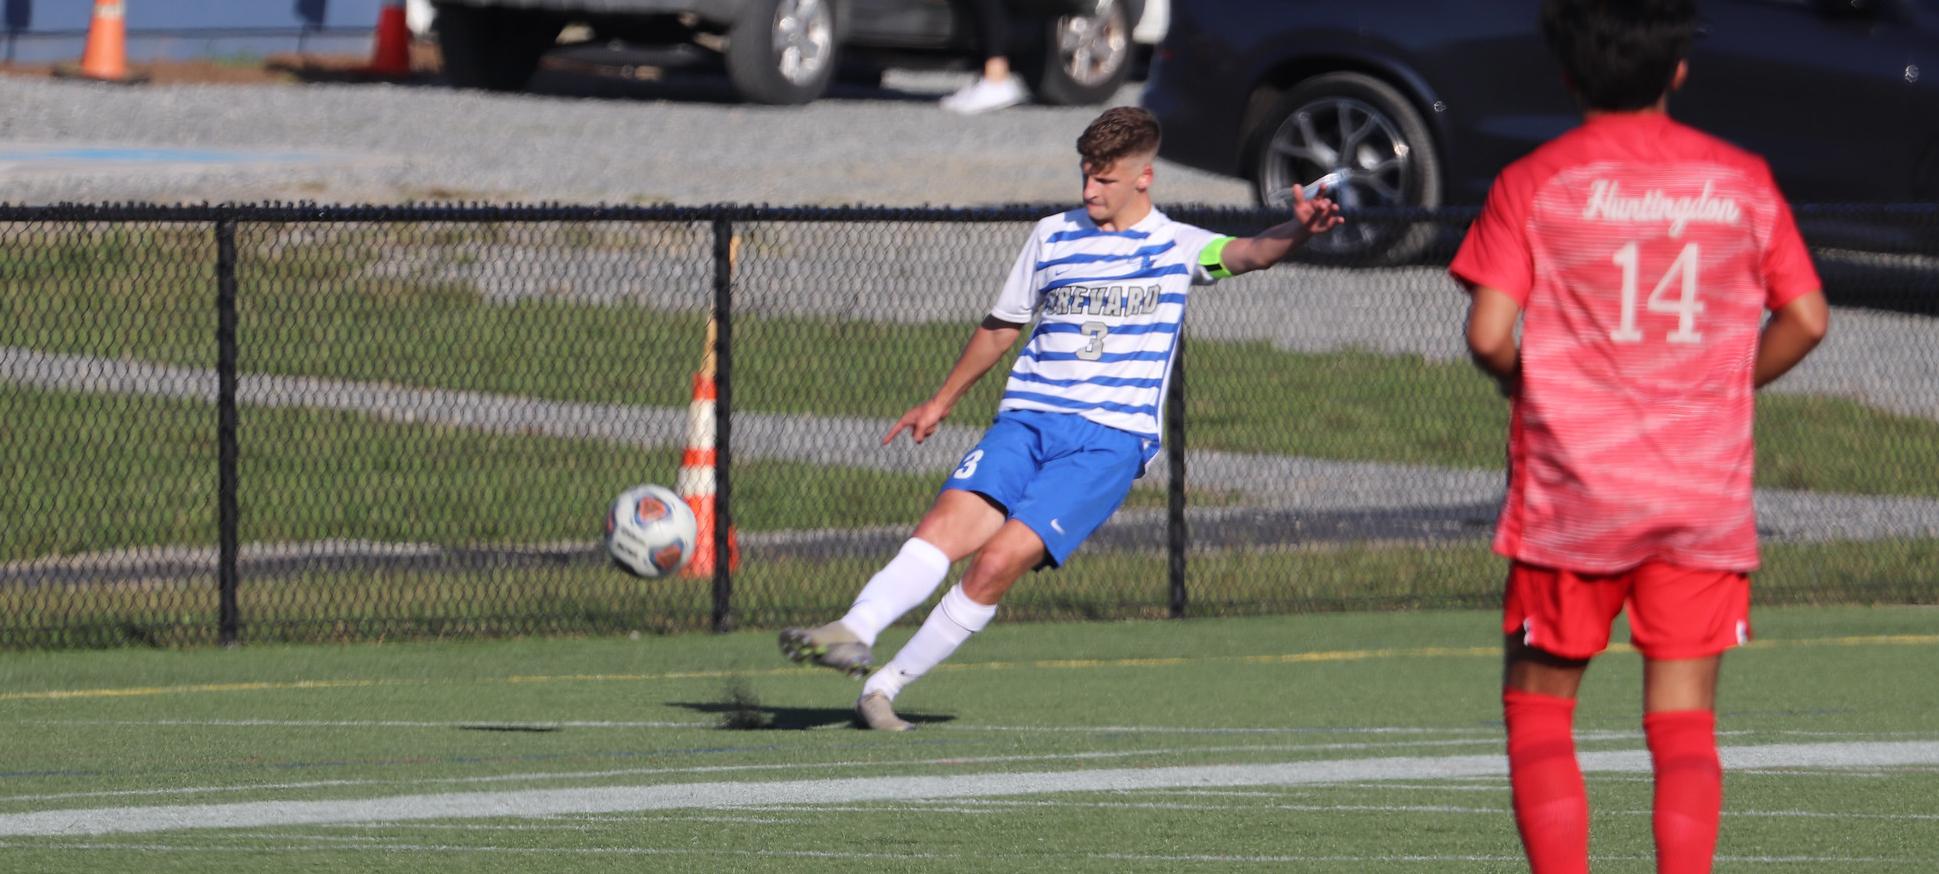 Sophomore defender Sam O'Callaghan scored a penalty that proved to be the game-winner over Pfeiffer (Photo courtesy of Victoria Brayman '22)